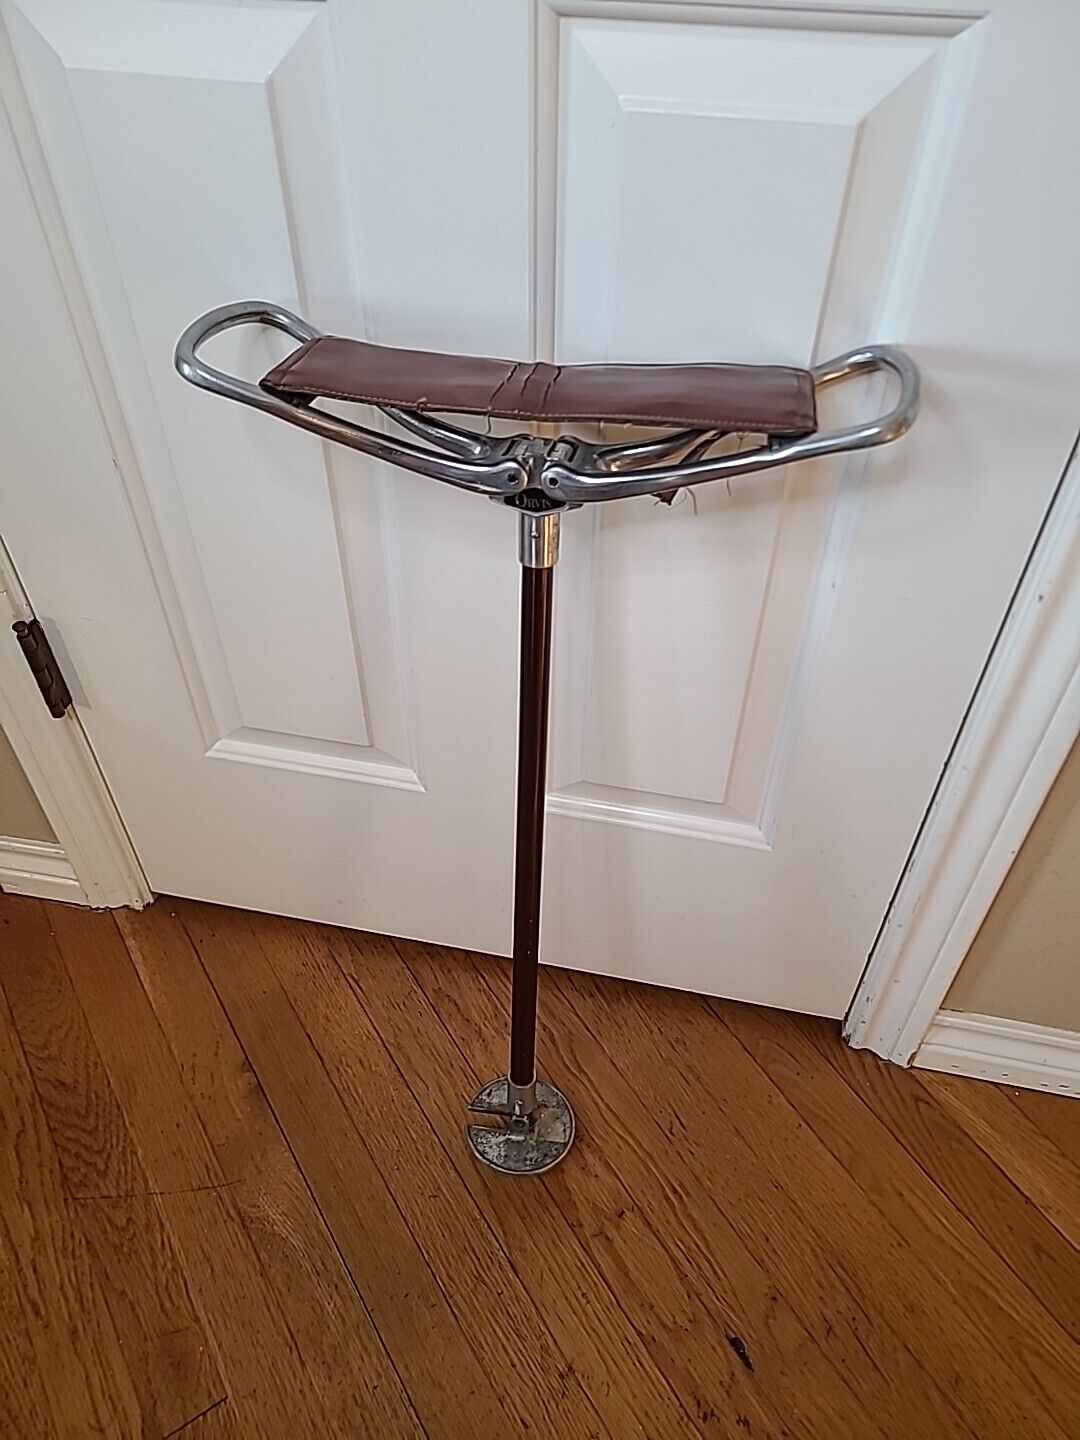 Vintage Fishing Shooting Seat Chair Walking Stick Made In England Weighs 2 lbs